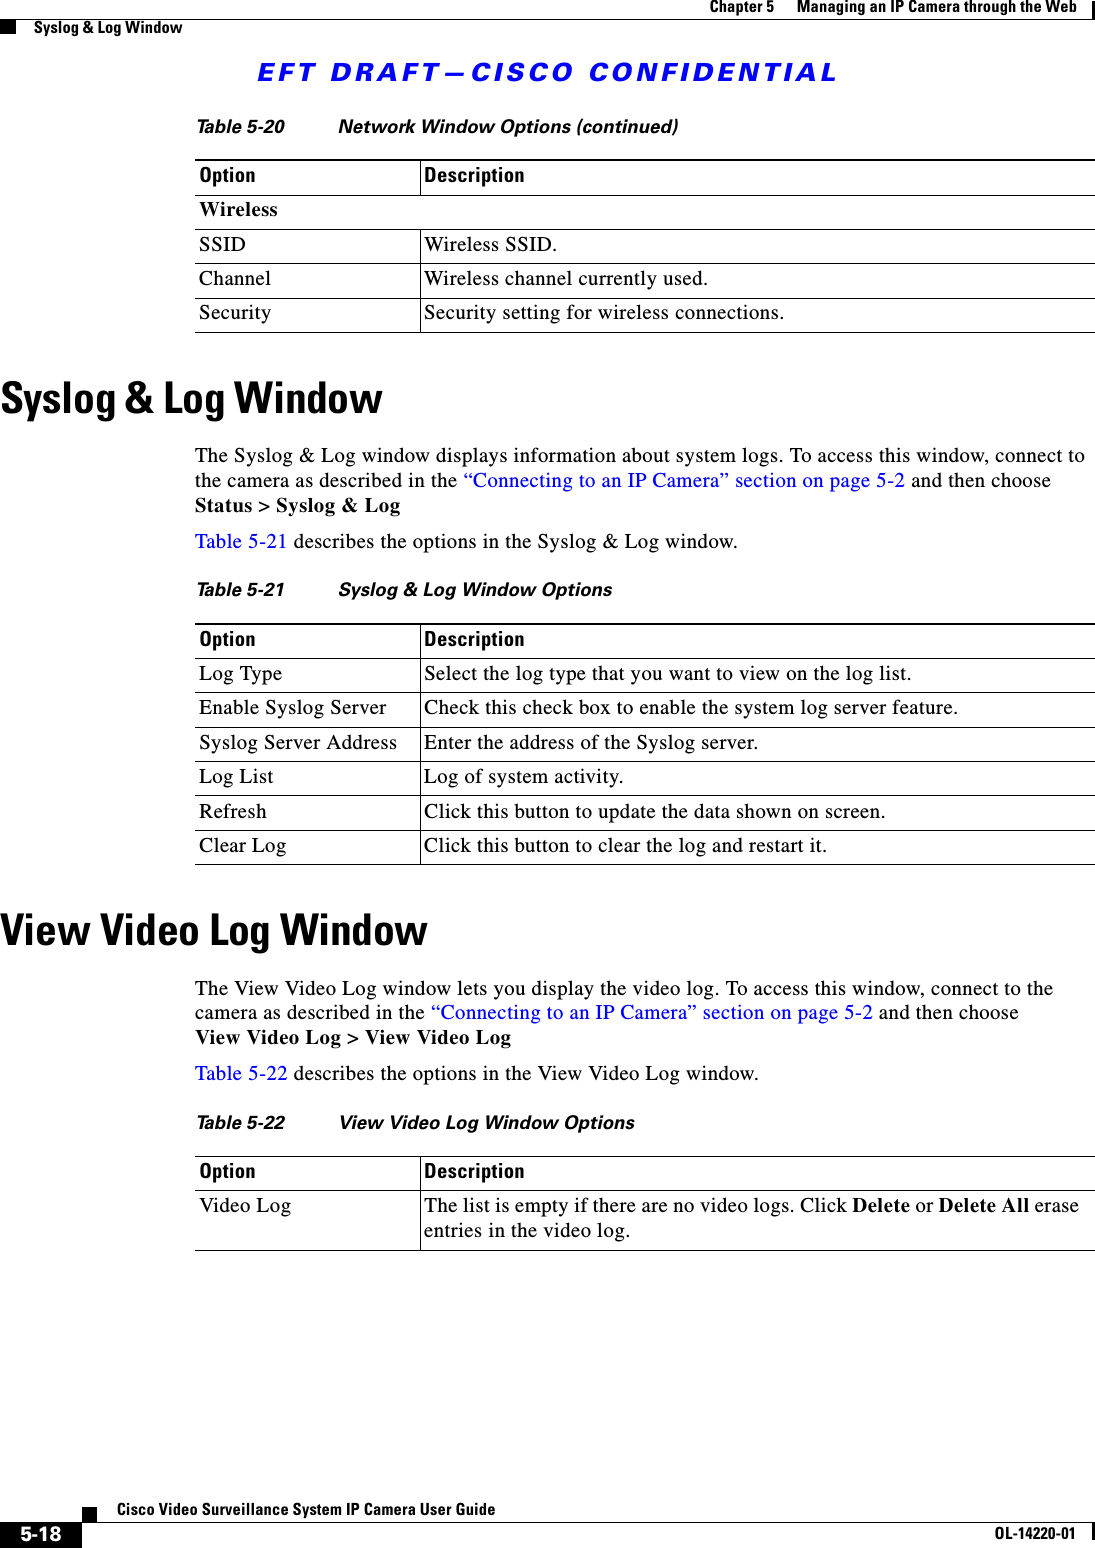 EFT DRAFT—CISCO CONFIDENTIAL5-18Cisco Video Surveillance System IP Camera User GuideOL-14220-01Chapter 5      Managing an IP Camera through the WebSyslog &amp; Log WindowSyslog &amp; Log WindowThe Syslog &amp; Log window displays information about system logs. To access this window, connect to the camera as described in the “Connecting to an IP Camera” section on page 5-2 and then choose Status &gt; Syslog &amp; LogTable 5-21 describes the options in the Syslog &amp; Log window.View Video Log WindowThe View Video Log window lets you display the video log. To access this window, connect to the camera as described in the “Connecting to an IP Camera” section on page 5-2 and then choose View Video Log &gt; View Video LogTable 5-22 describes the options in the View Video Log window.WirelessSSID Wireless SSID.Channel Wireless channel currently used.Security Security setting for wireless connections.Table 5-20 Network Window Options (continued)Option DescriptionTable 5-21 Syslog &amp; Log Window OptionsOption DescriptionLog Type Select the log type that you want to view on the log list.Enable Syslog Server Check this check box to enable the system log server feature.Syslog Server Address Enter the address of the Syslog server.Log List Log of system activity.Refresh Click this button to update the data shown on screen.Clear Log Click this button to clear the log and restart it.Table 5-22 View Video Log Window OptionsOption DescriptionVideo Log The list is empty if there are no video logs. Click Delete or Delete All erase entries in the video log.